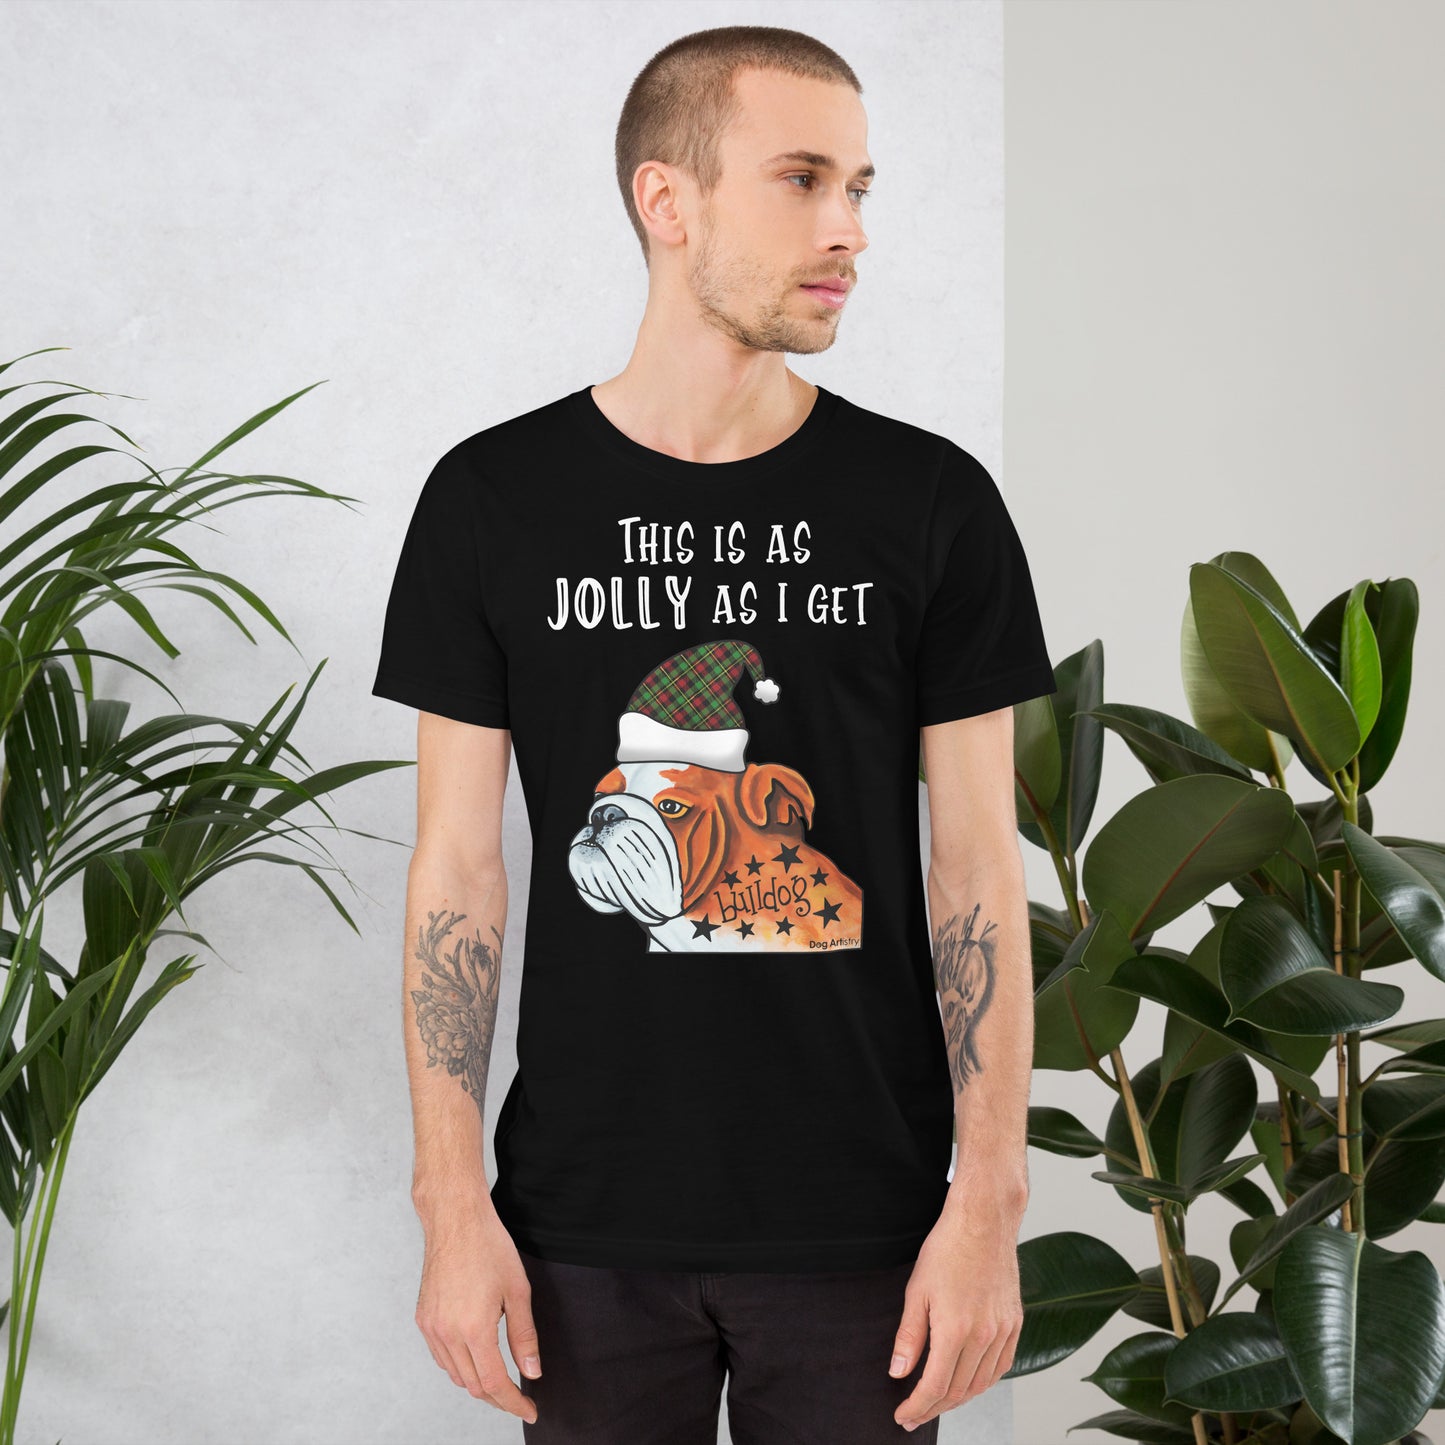 This is as Jolly as I get - English Bulldog holiday unisex t-shirt black by Dog Artistry